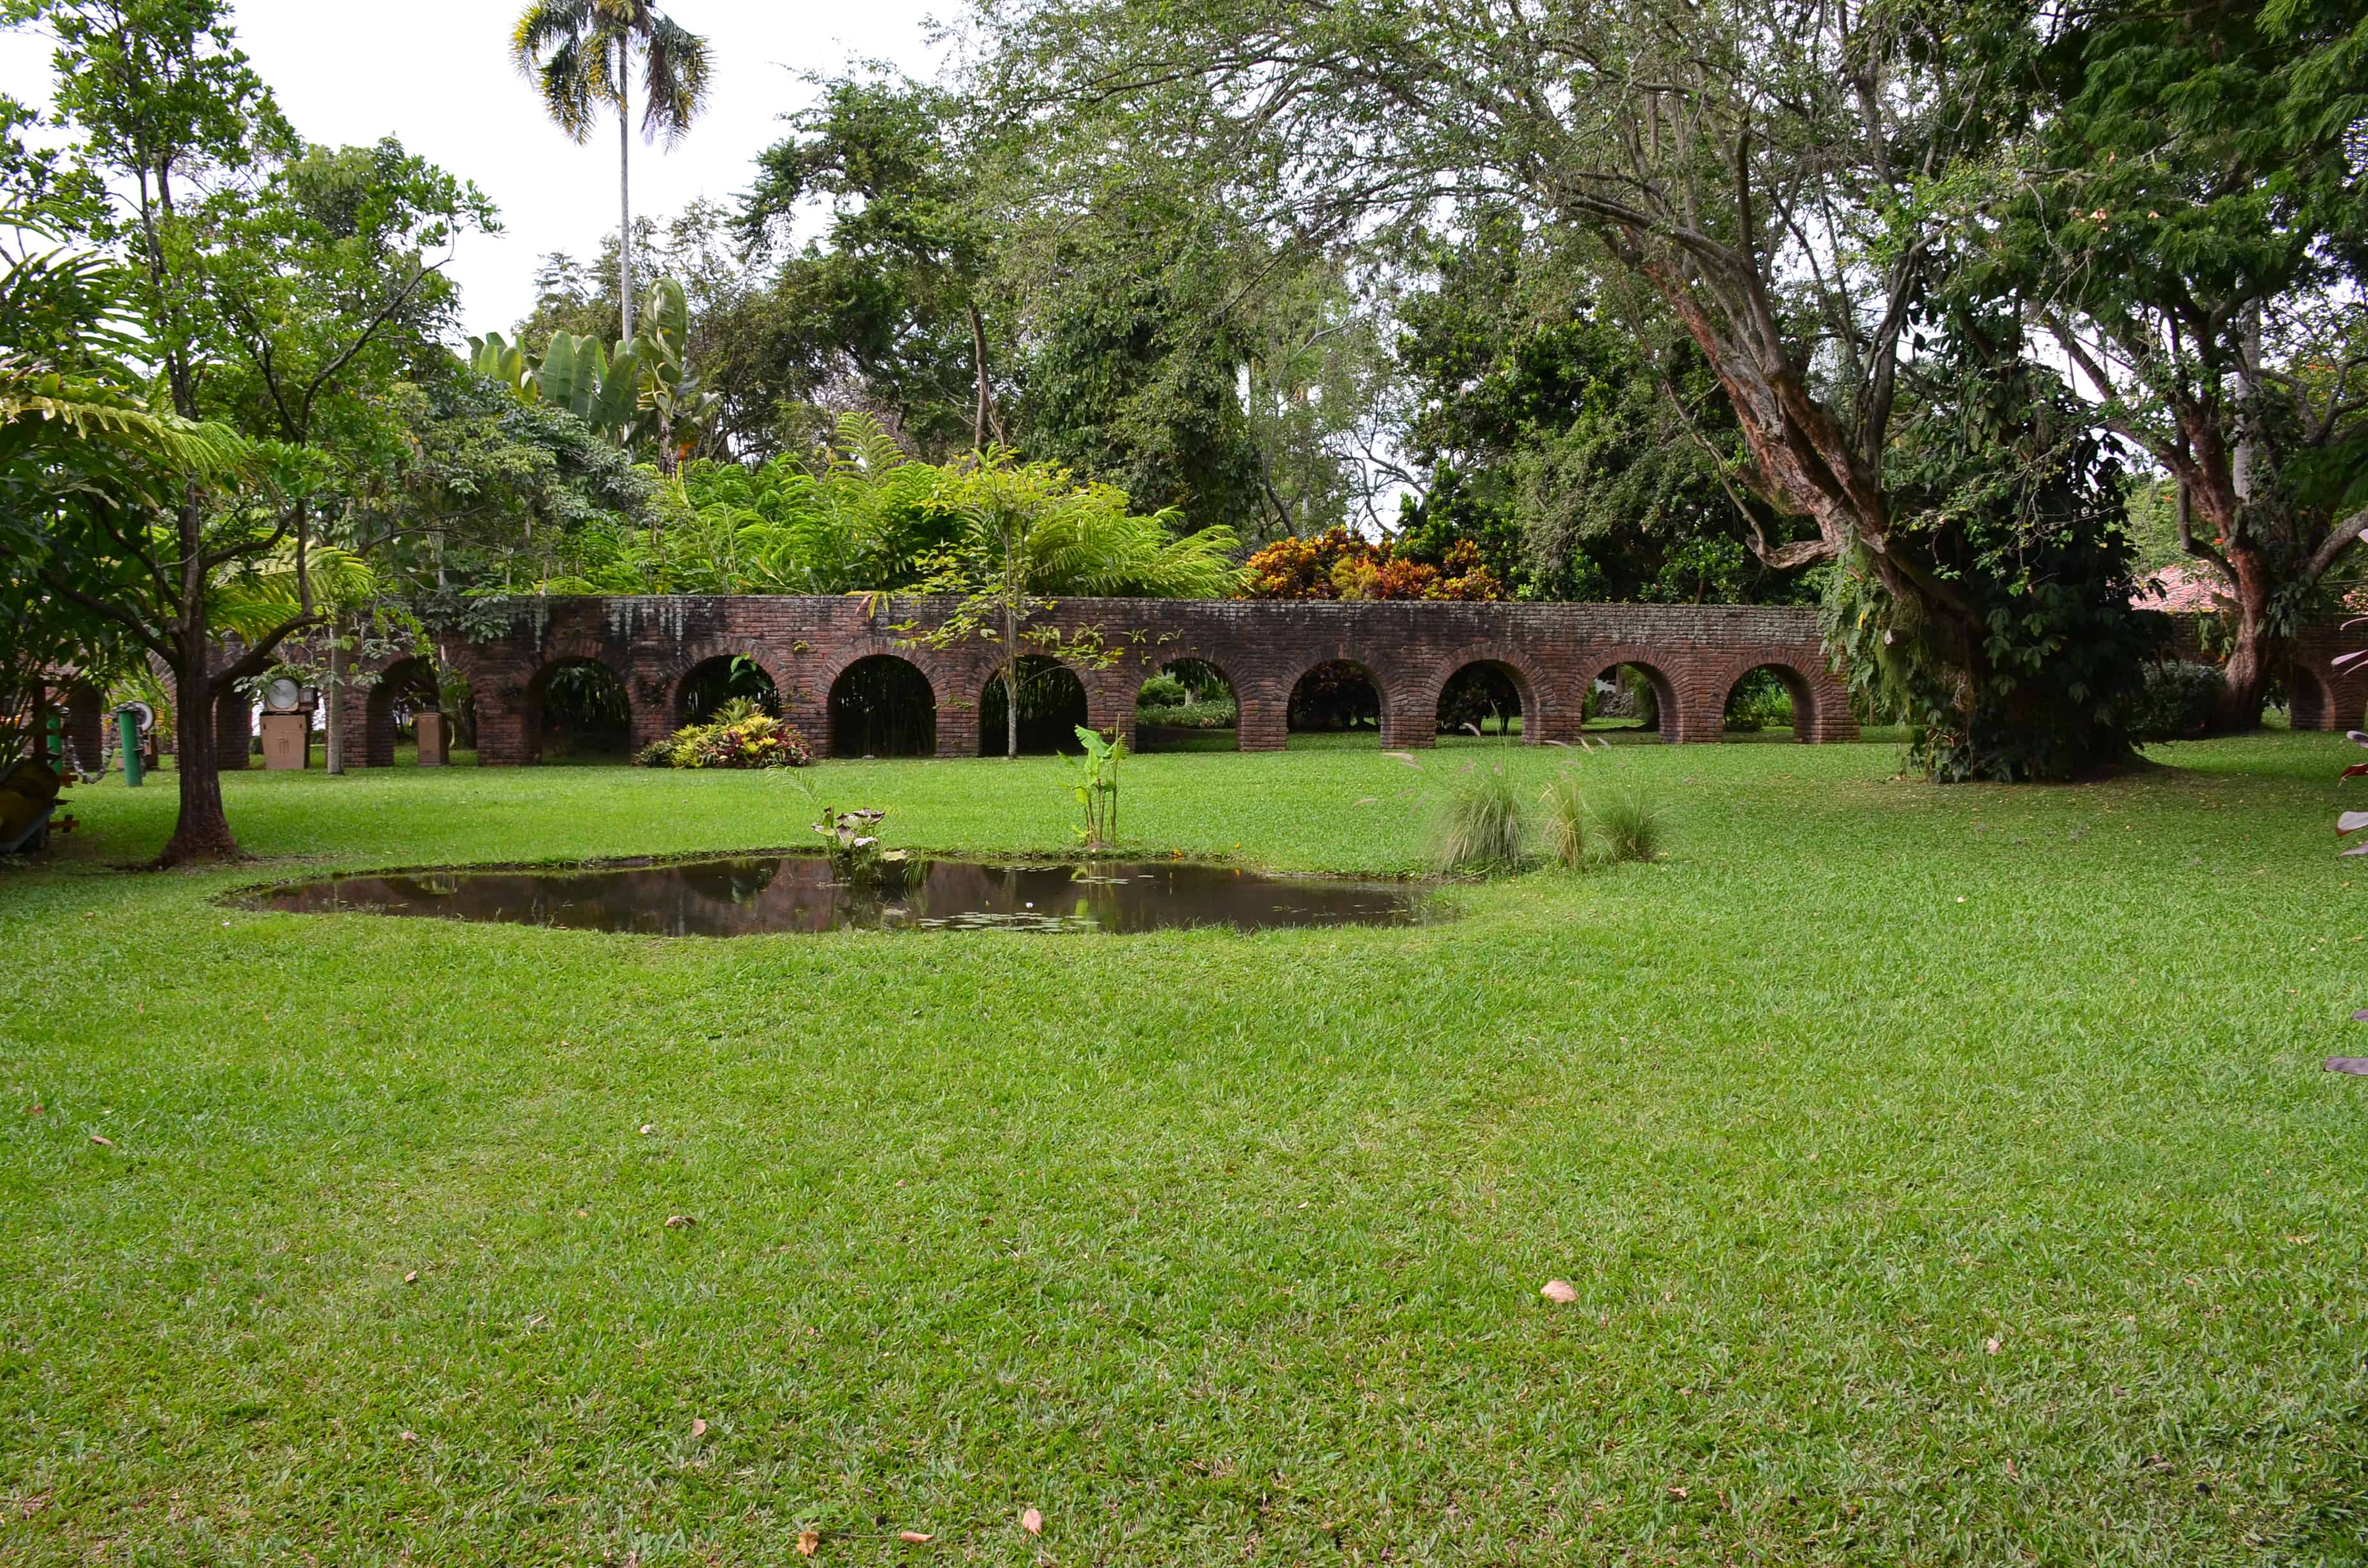 The grounds at the Sugarcane Museum in Valle del Cauca, Colombia